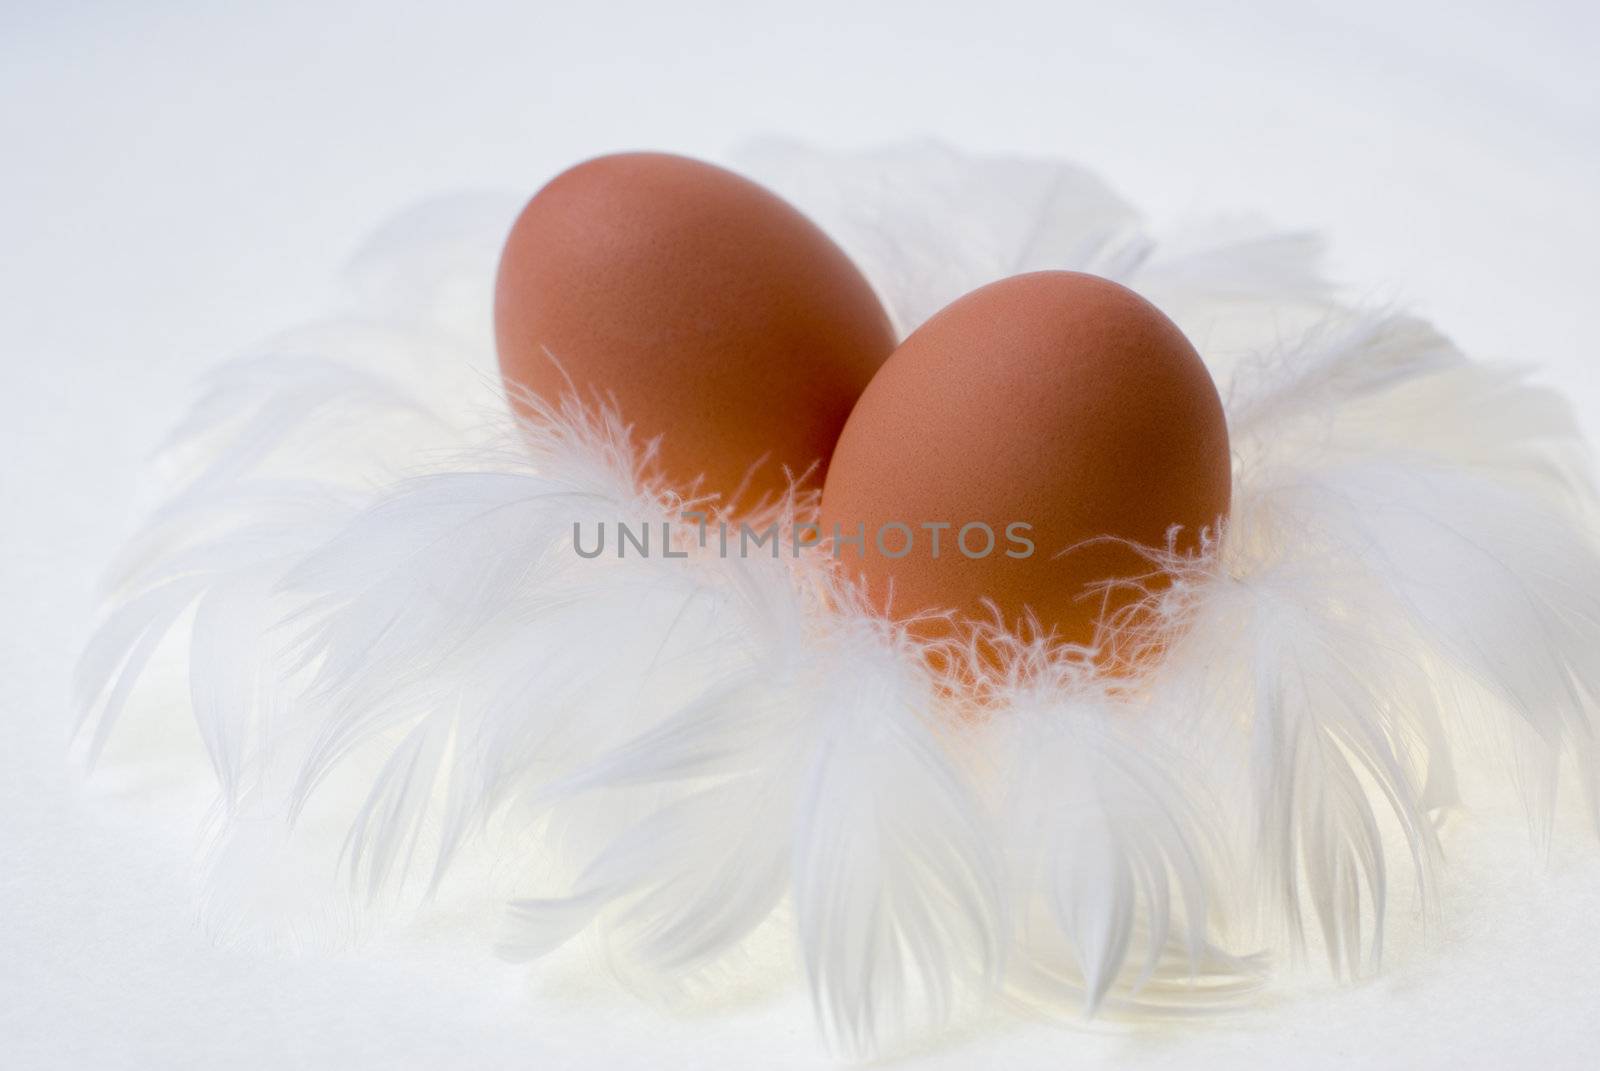 Two egg in white feather nest. Opposition between hard and soft, also a metaphore of maternity and care.